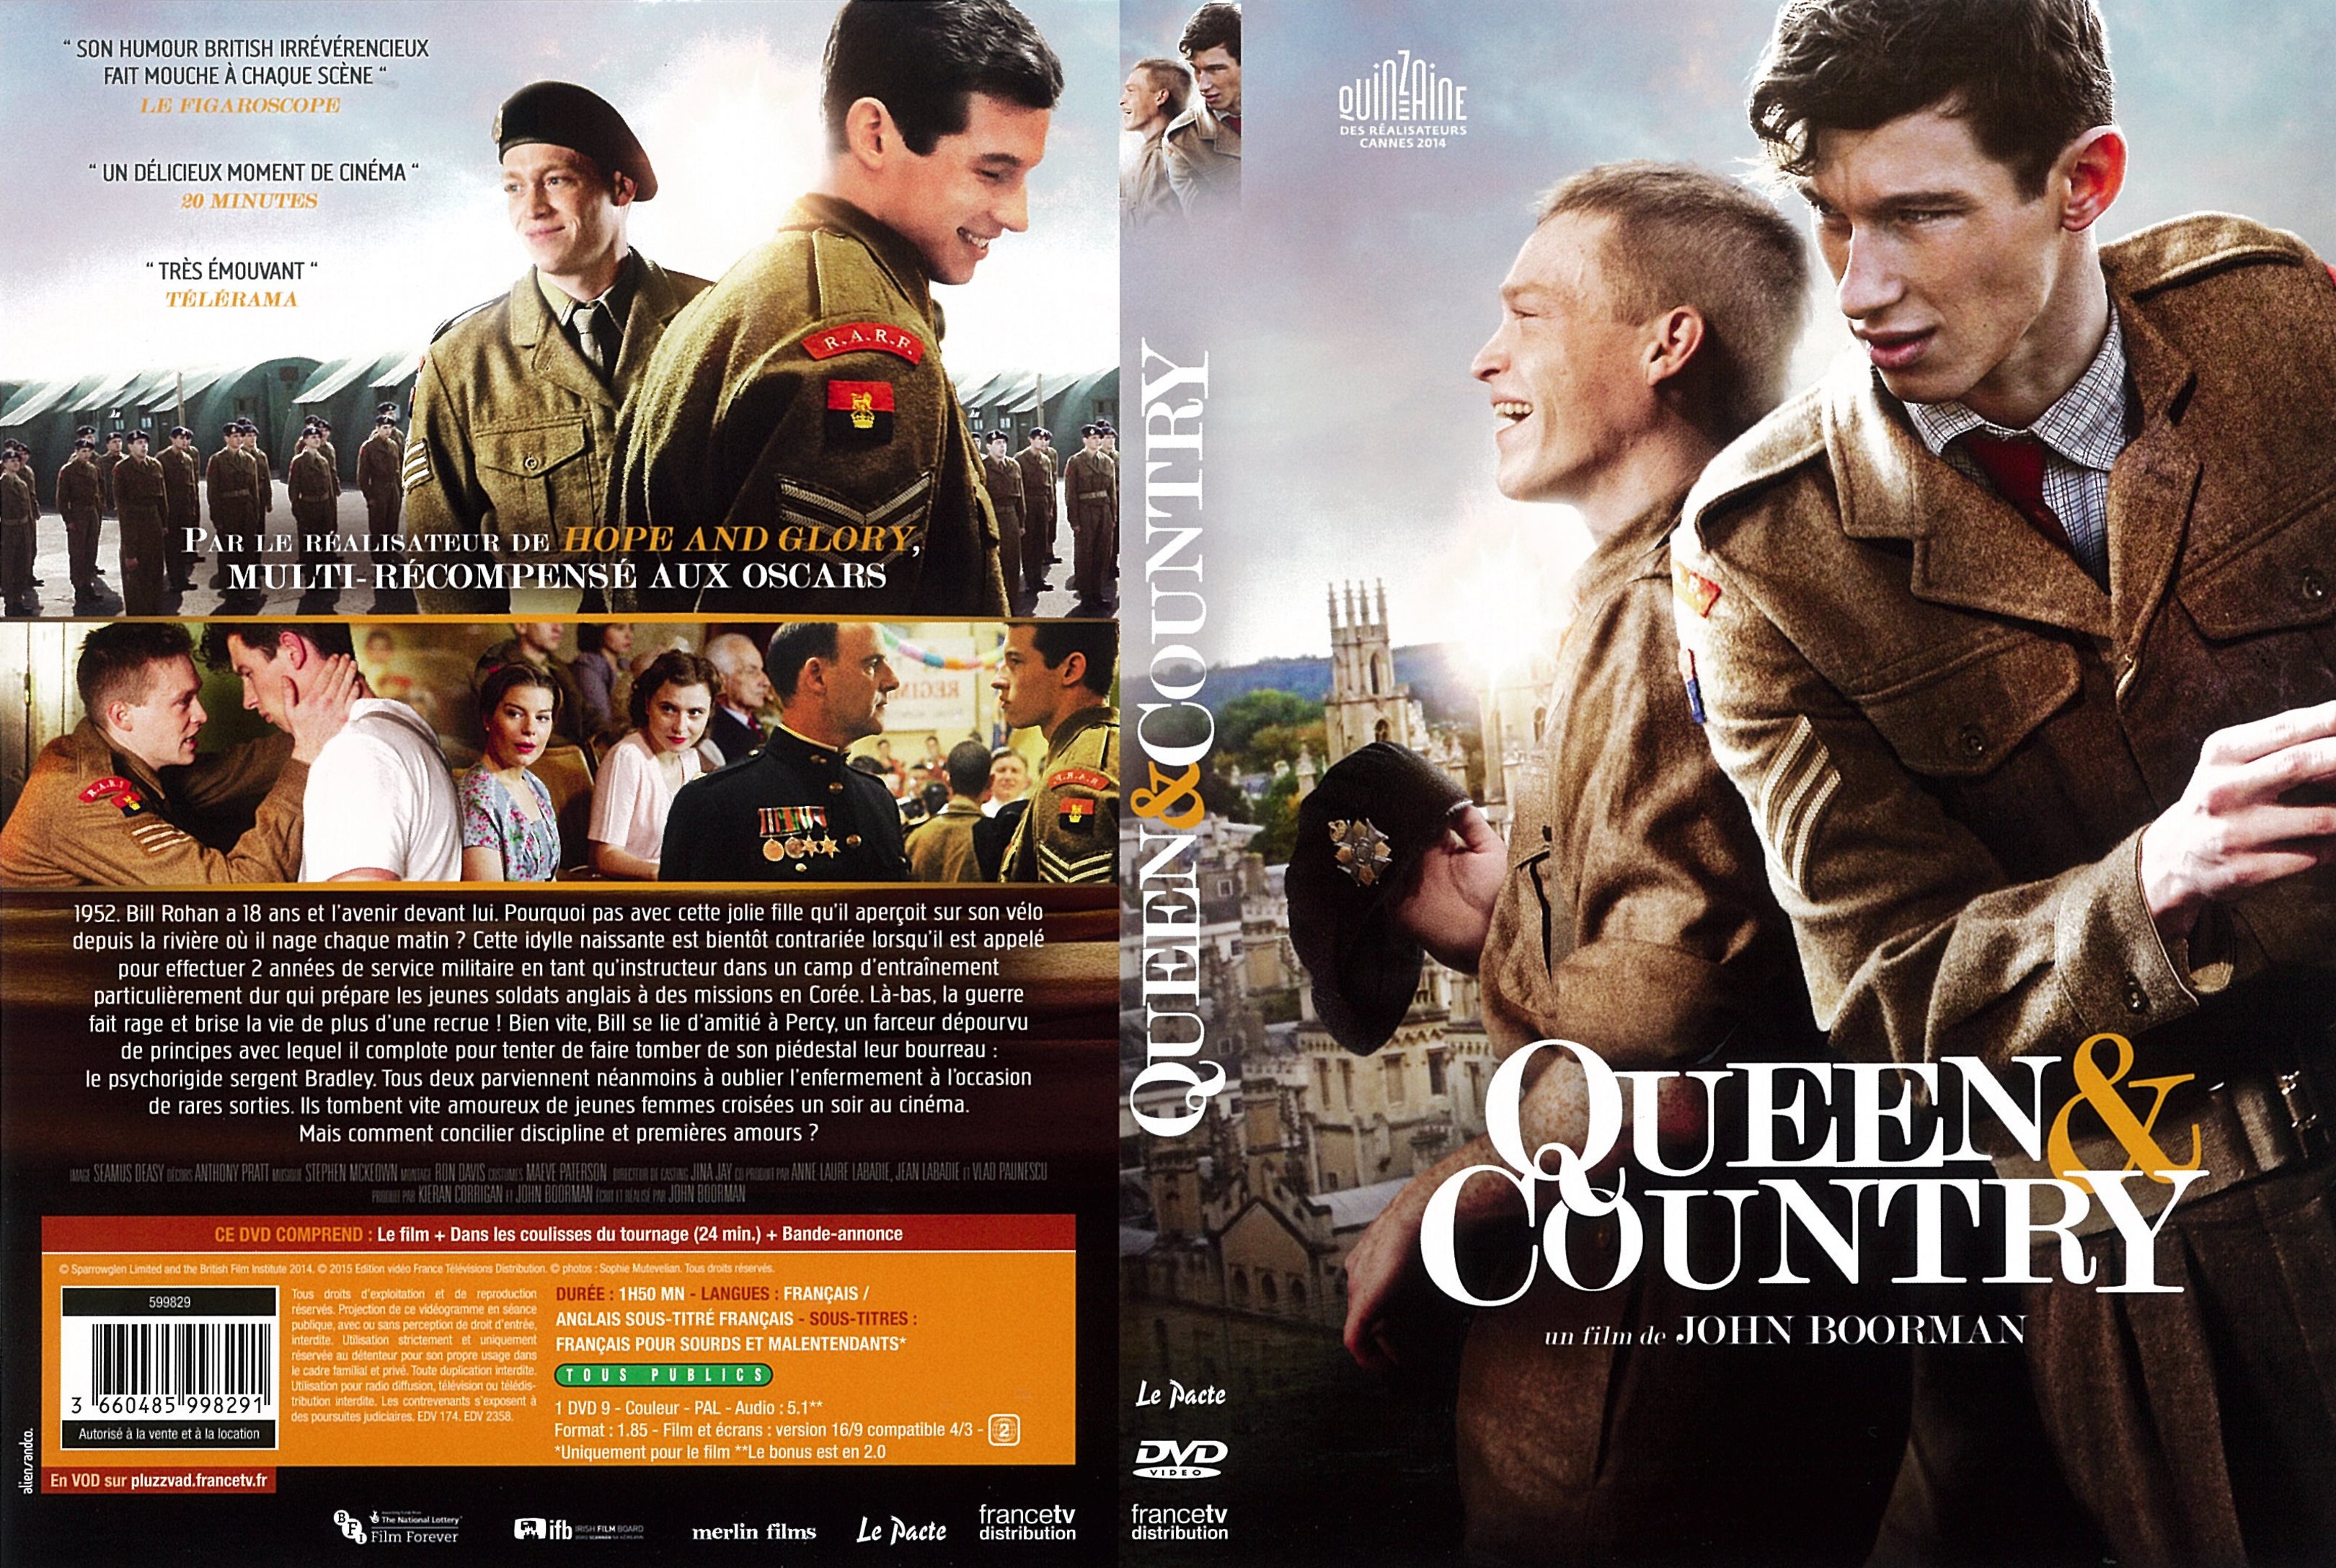 Jaquette DVD Queen & Country